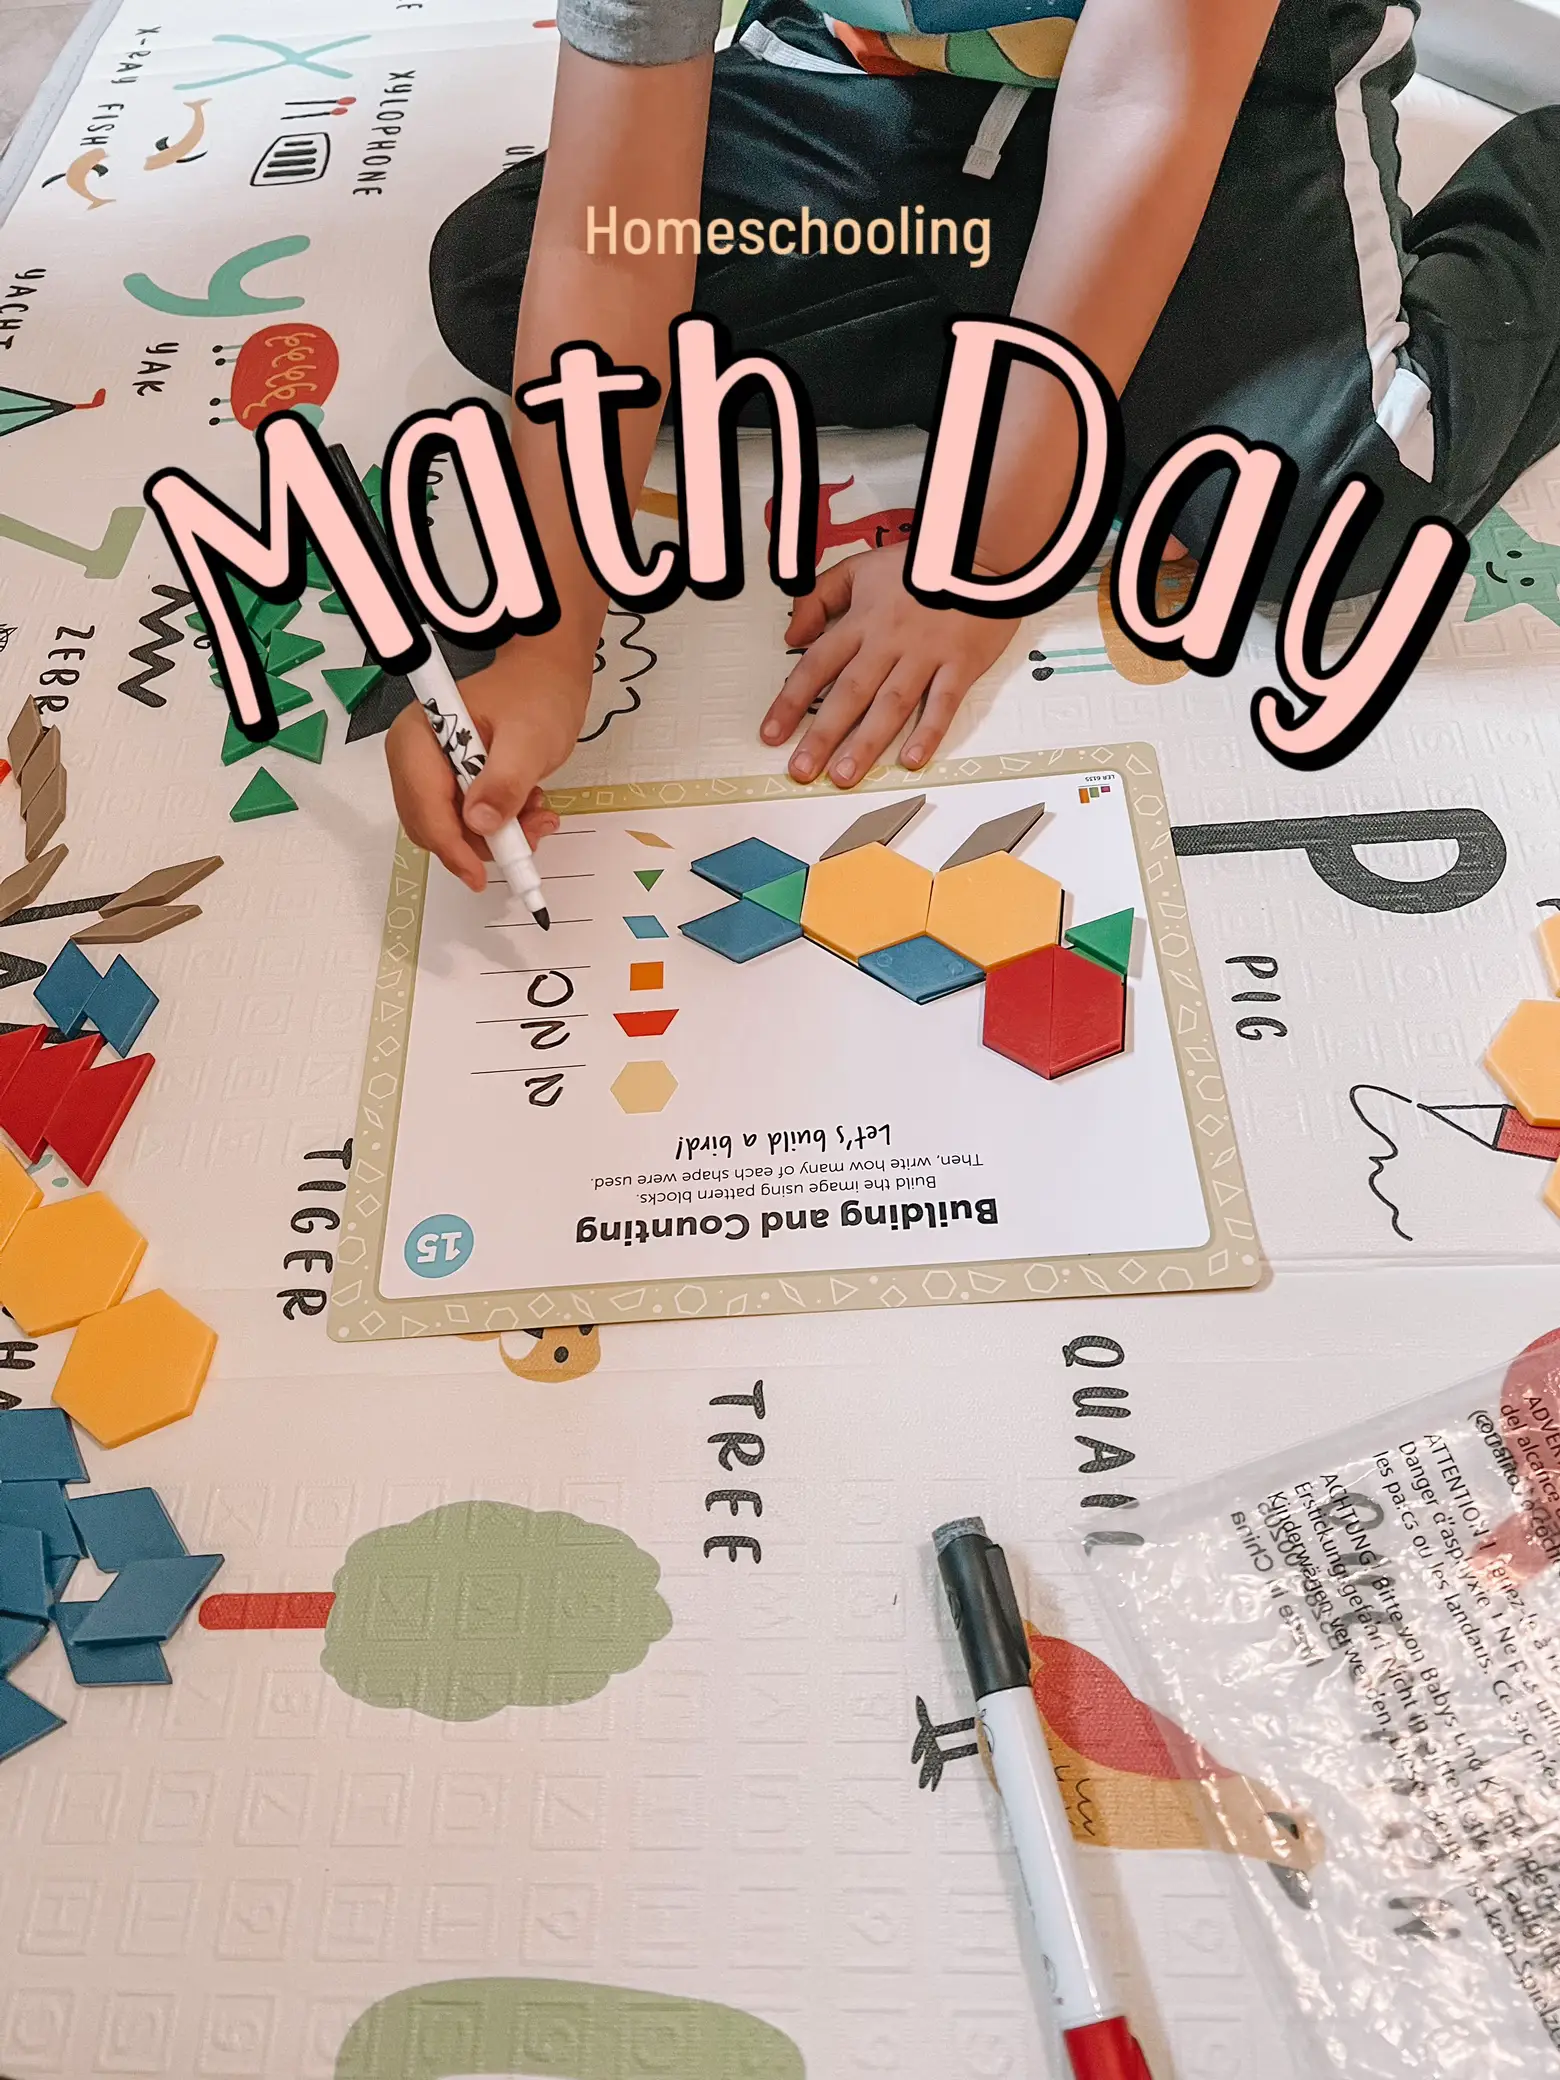 Math Day's images